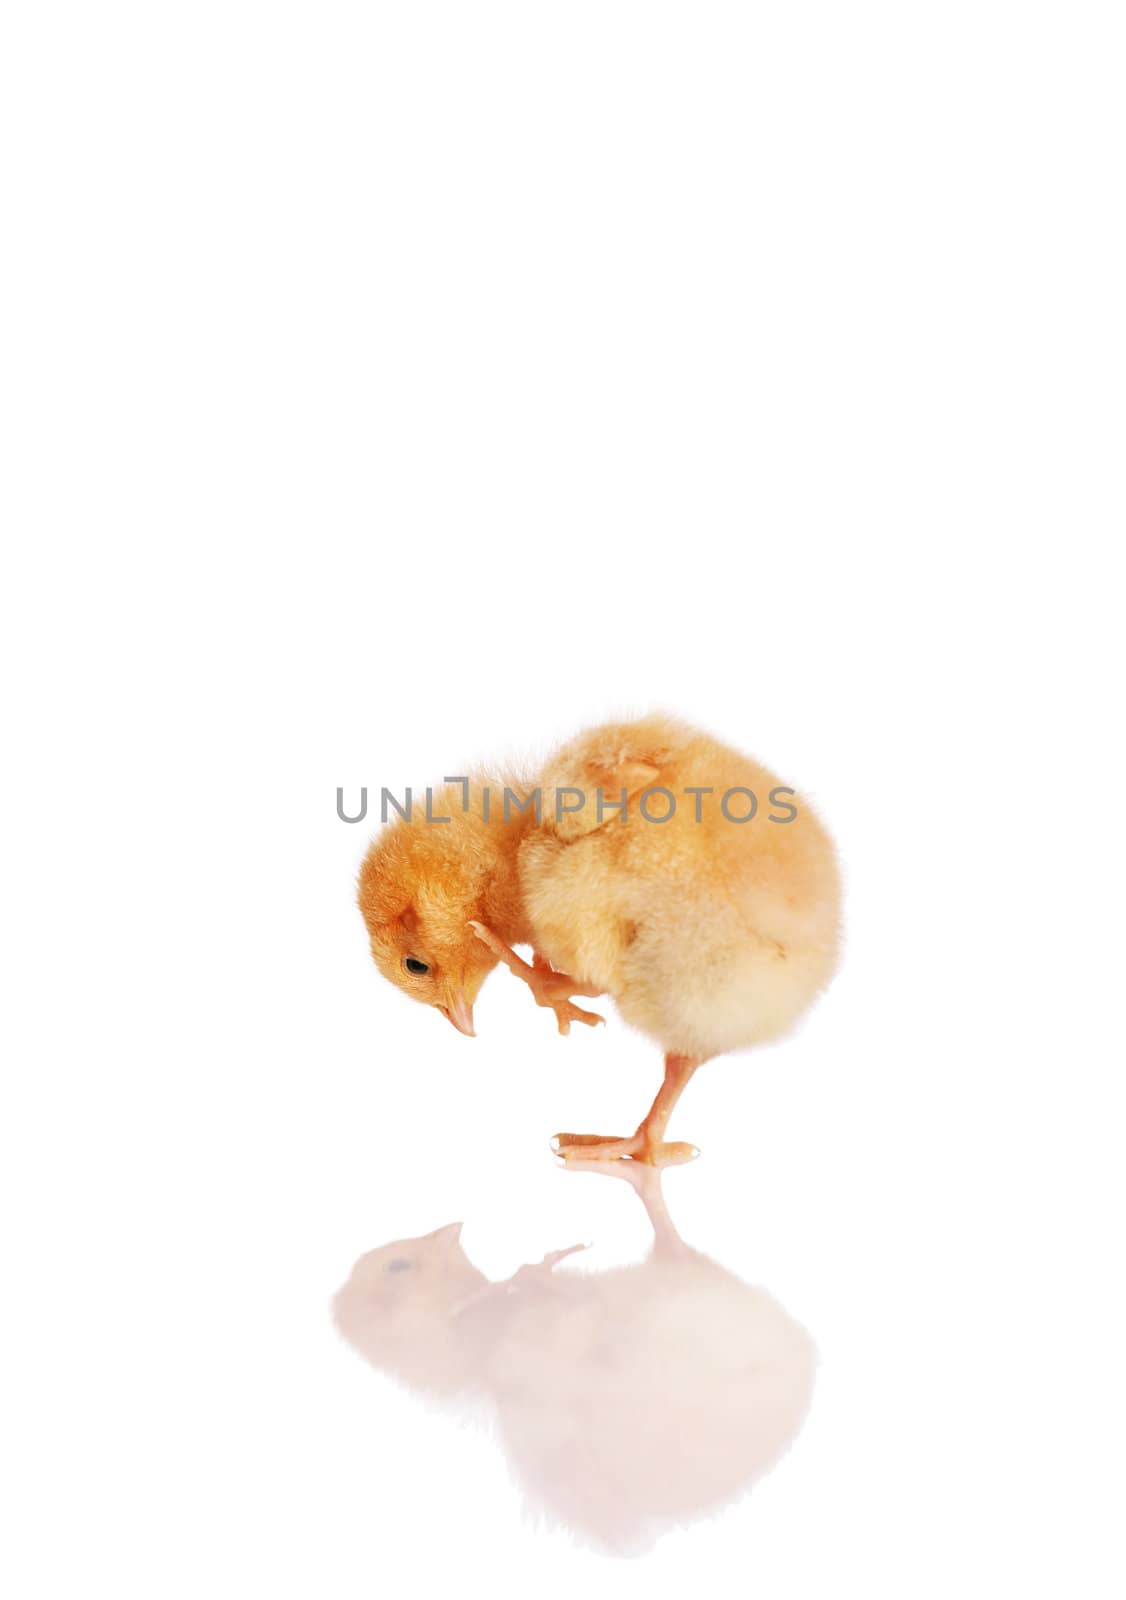 Little chick bending down  looking at its reflection